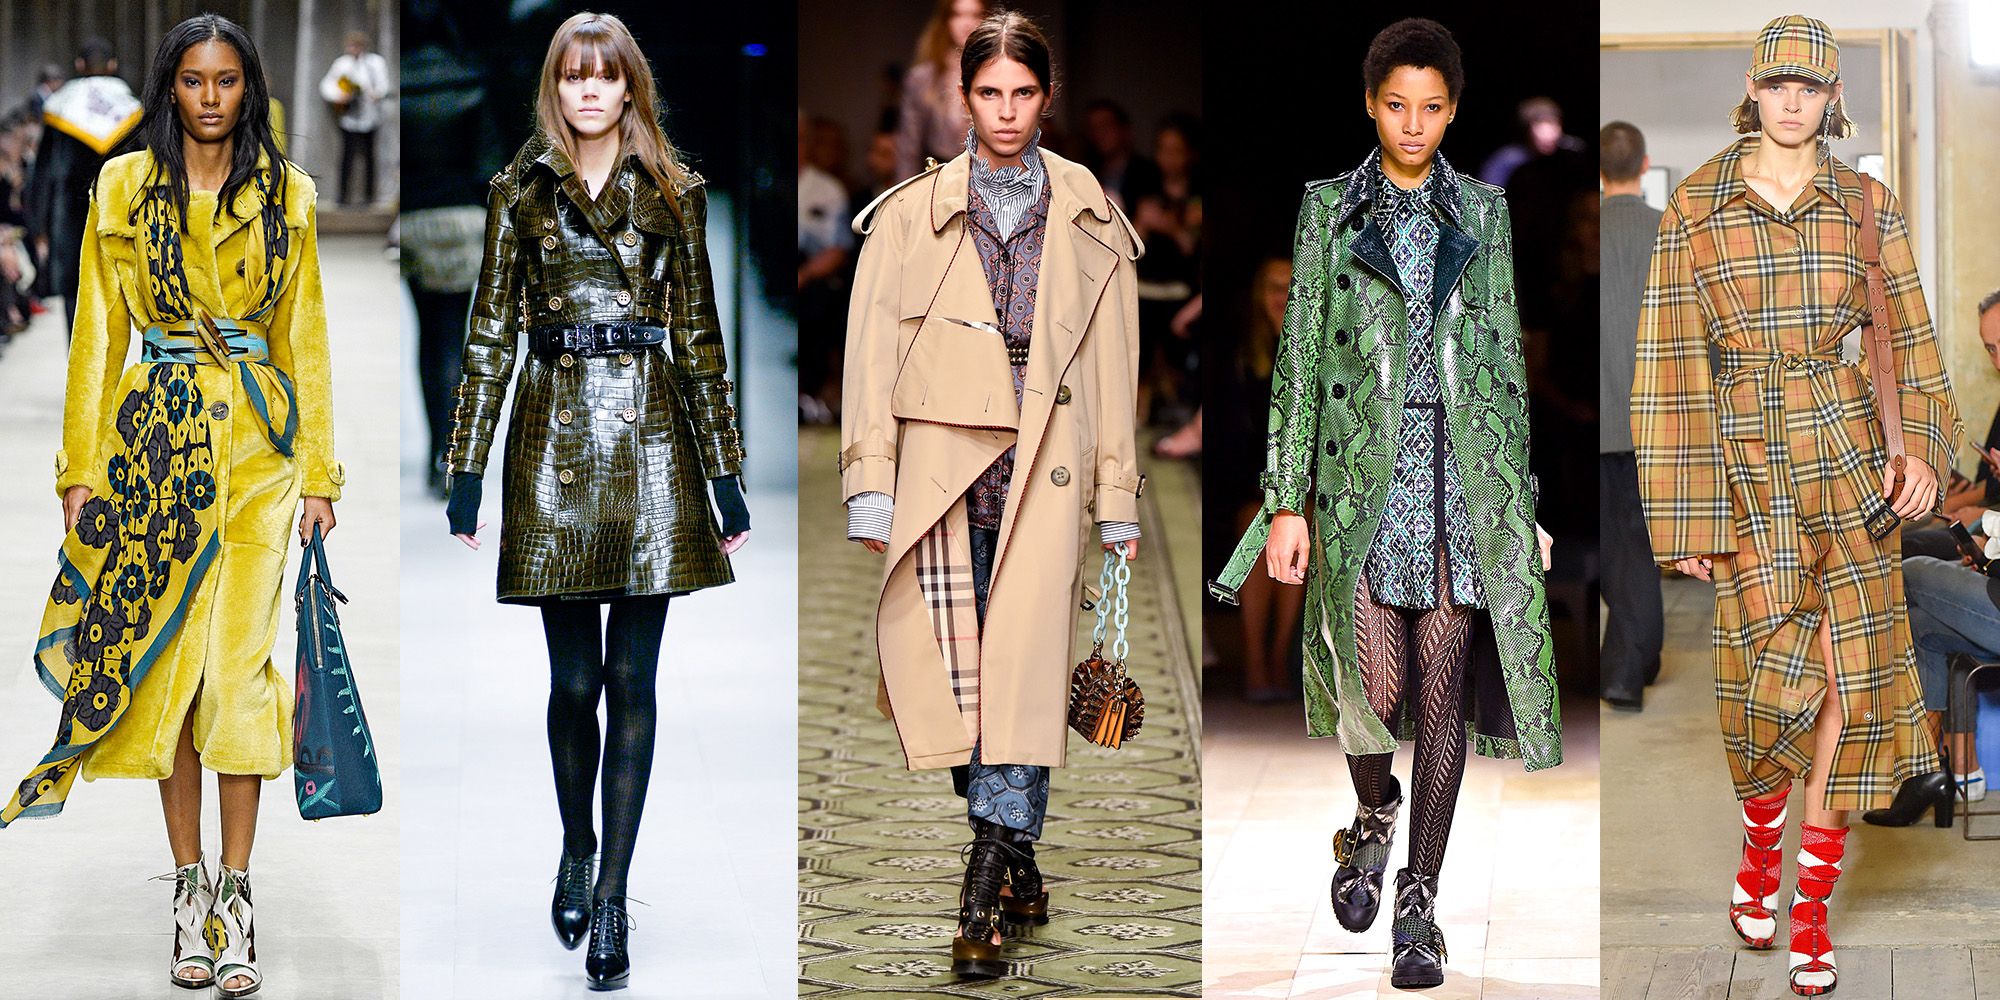 Christopher Reimagined Iconic Trench Coat During 14-Year Tenure